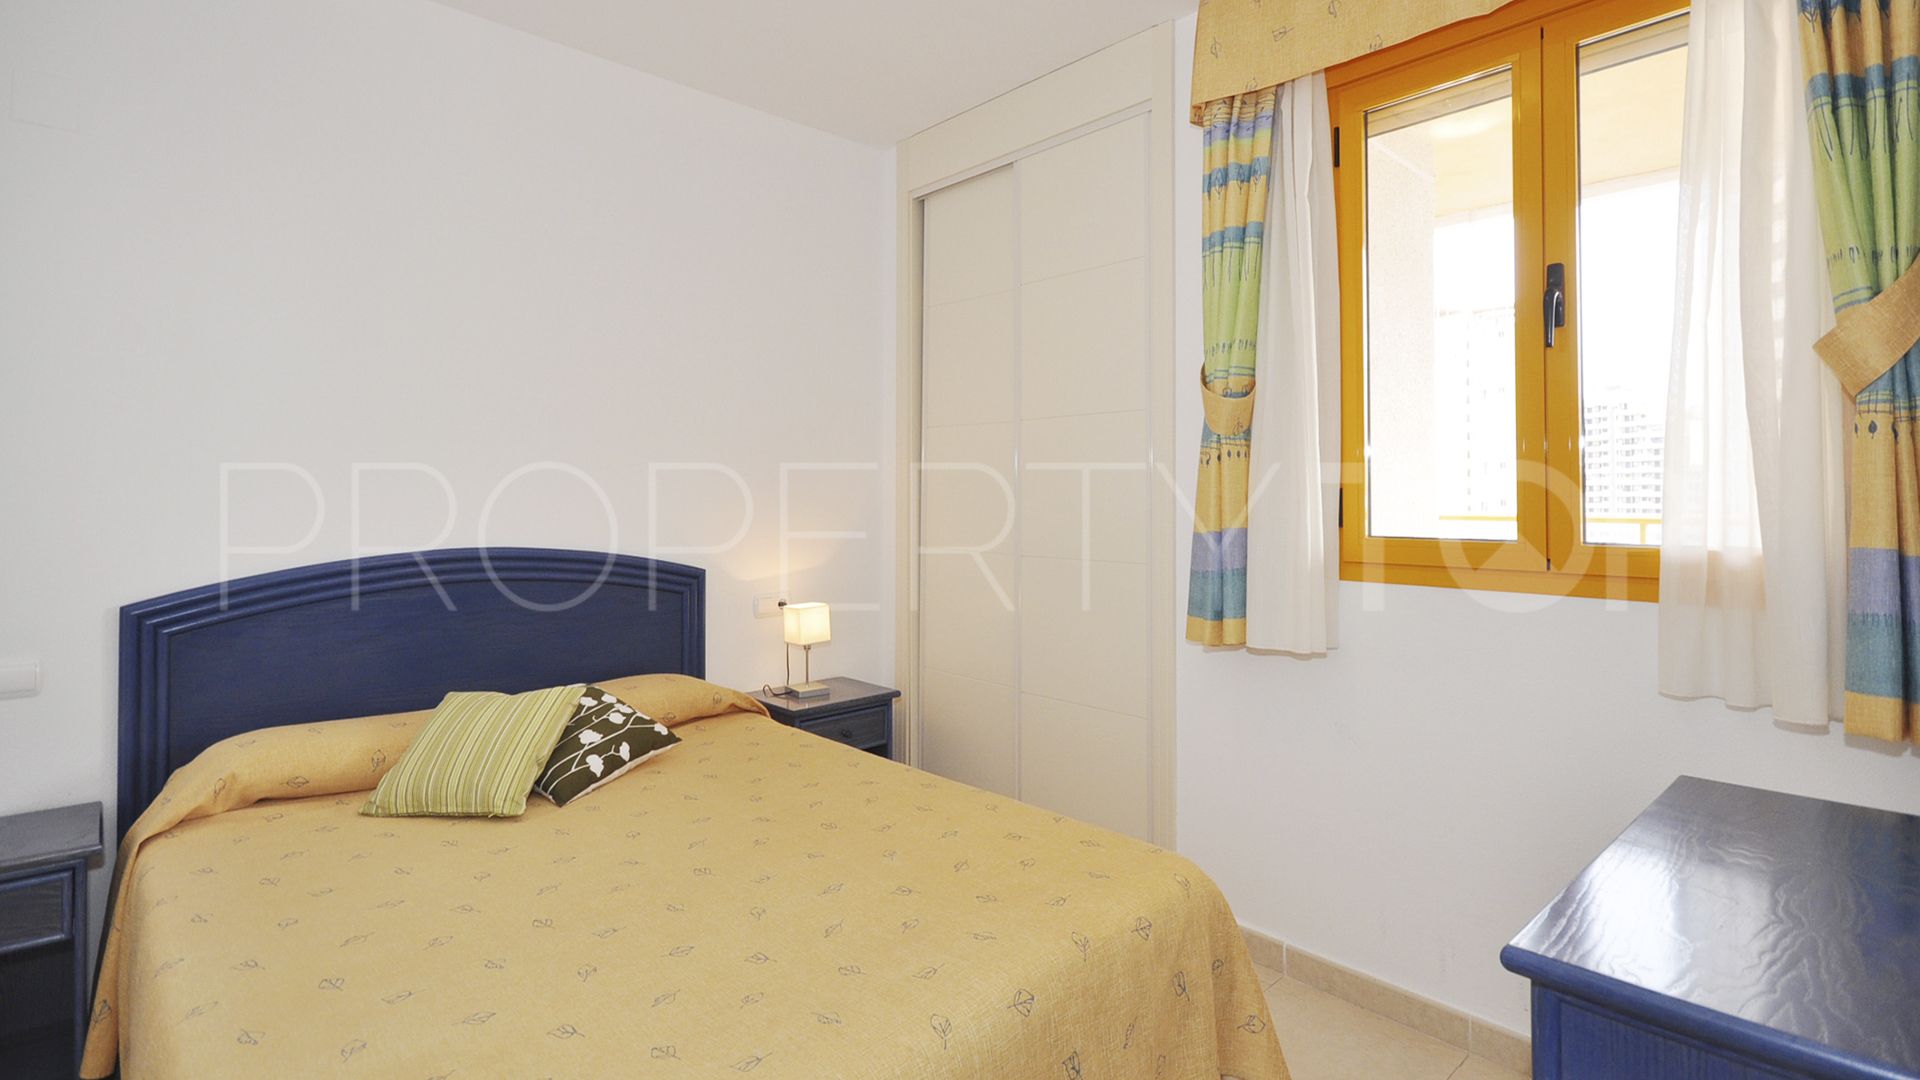 1 bedroom Calpe apartment for sale